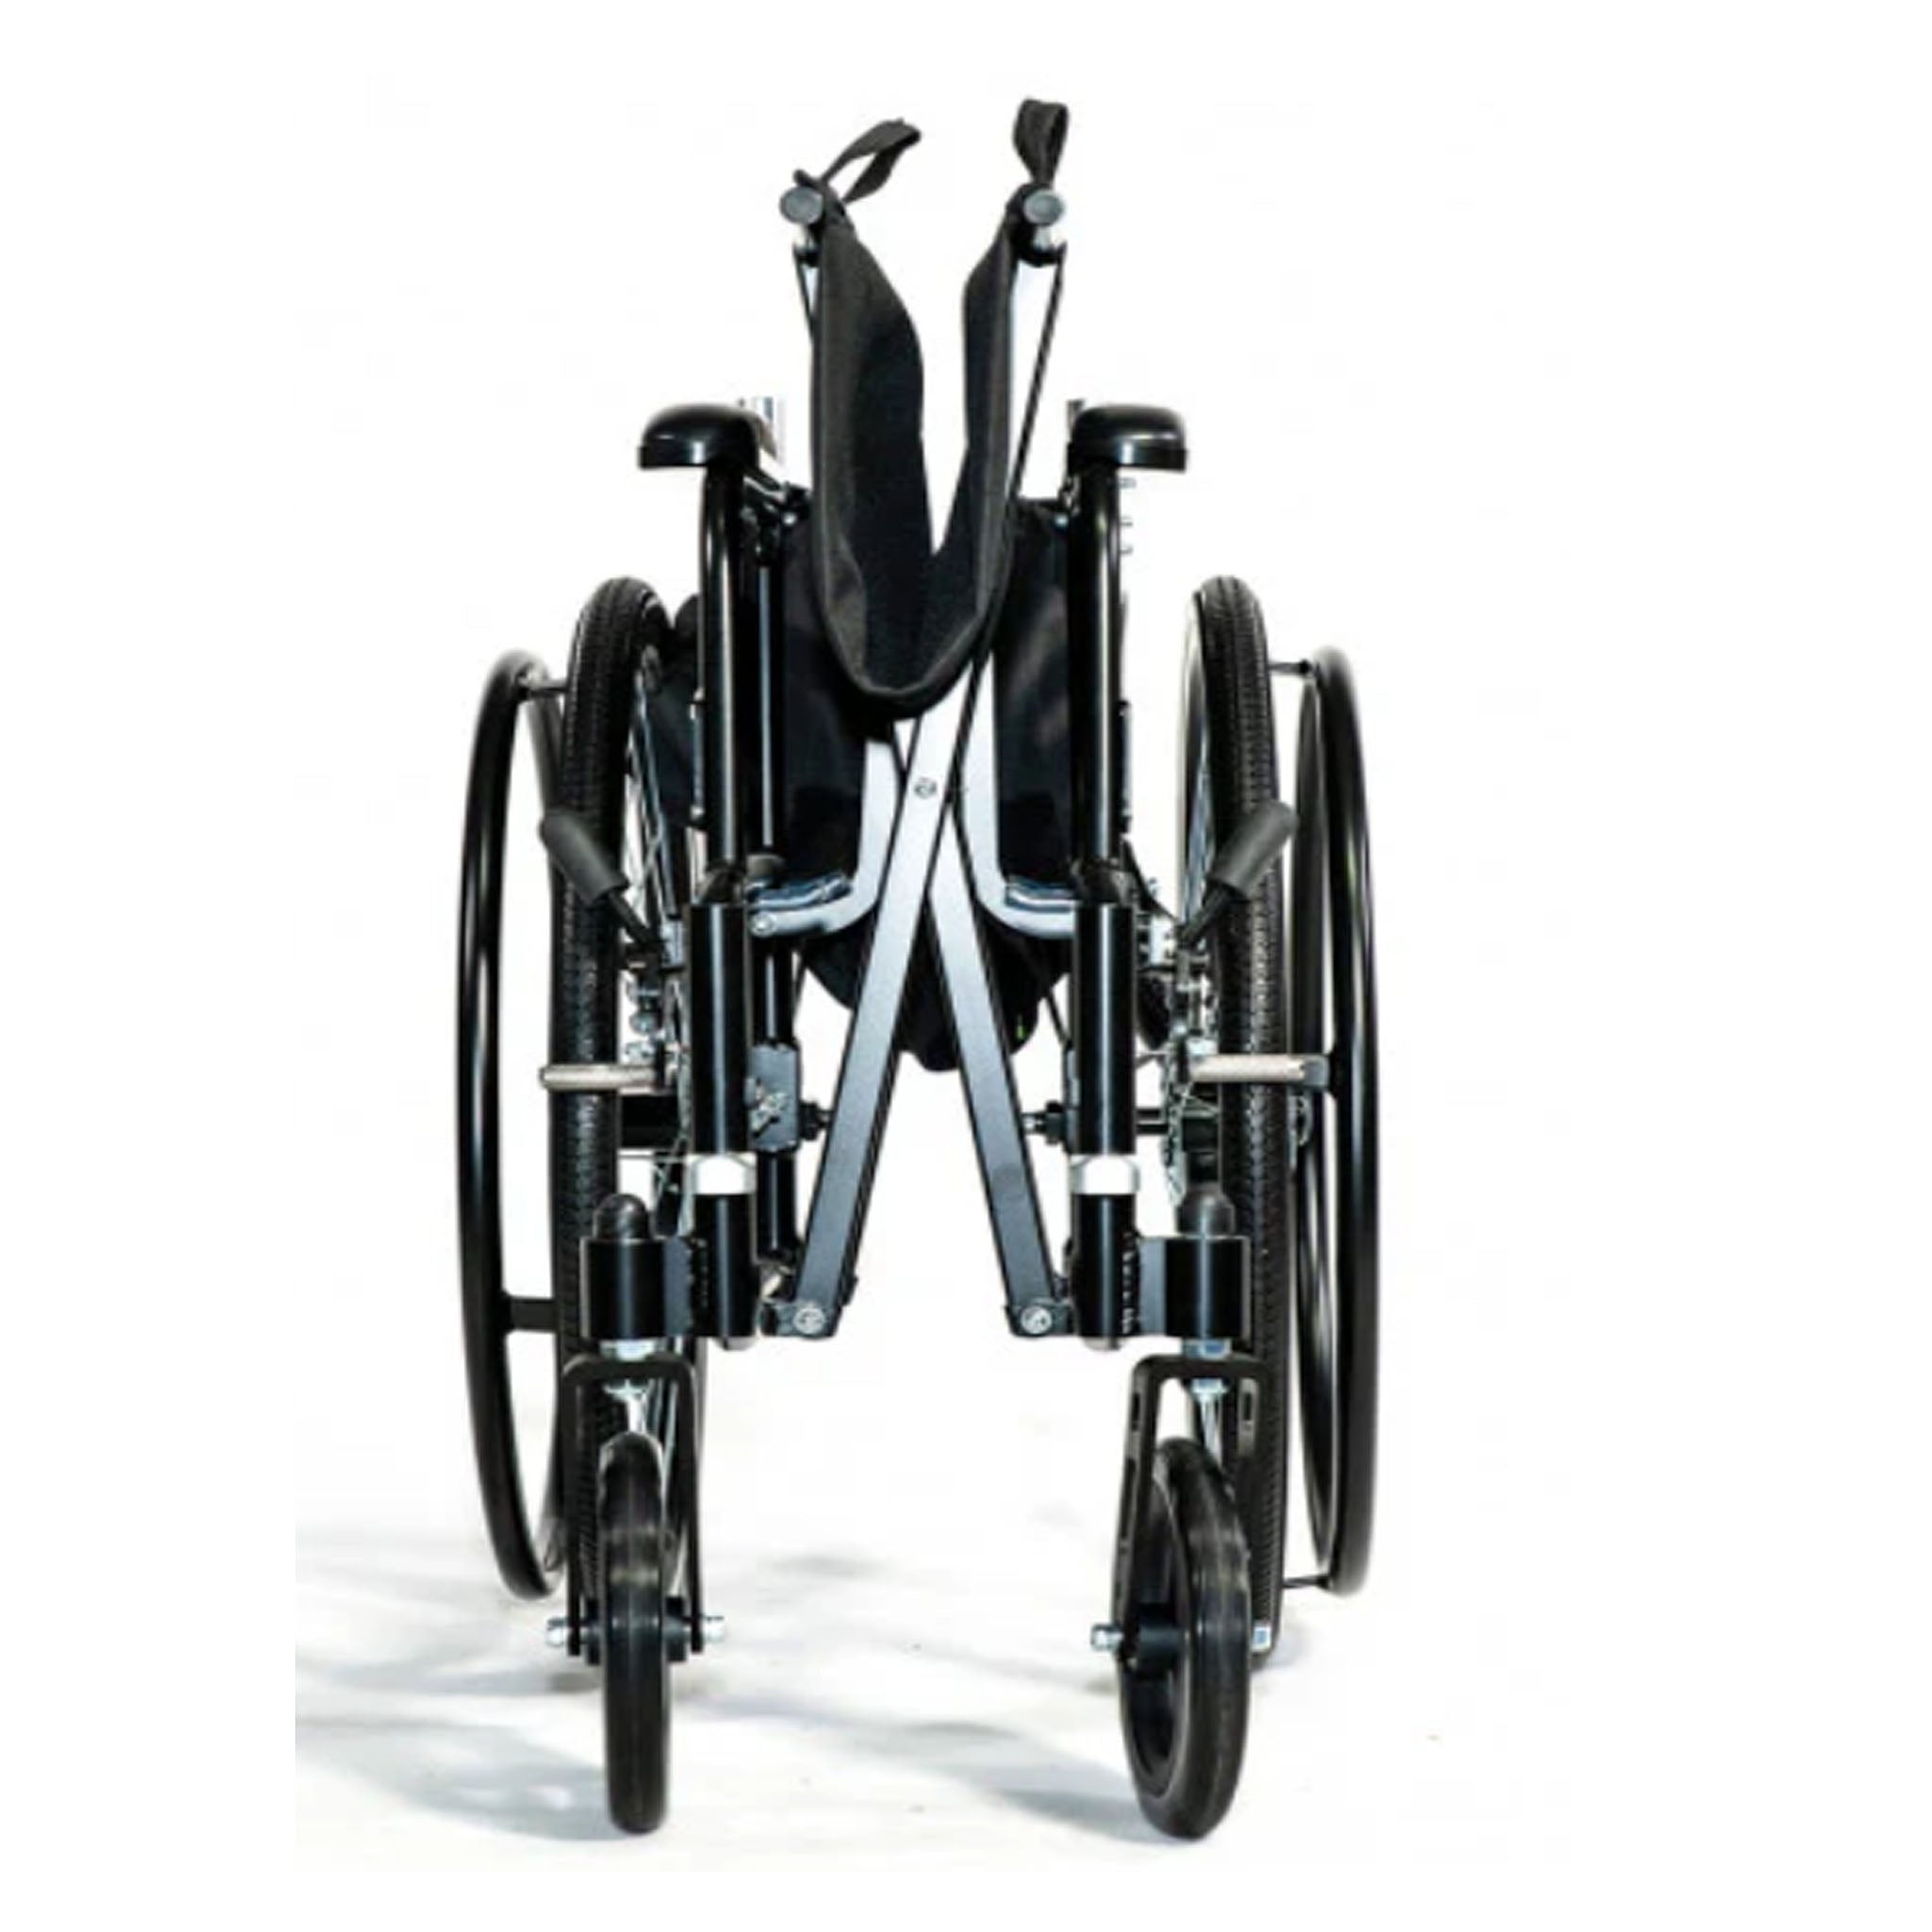 Feather Mobility HD Heavy Duty Wheelchair